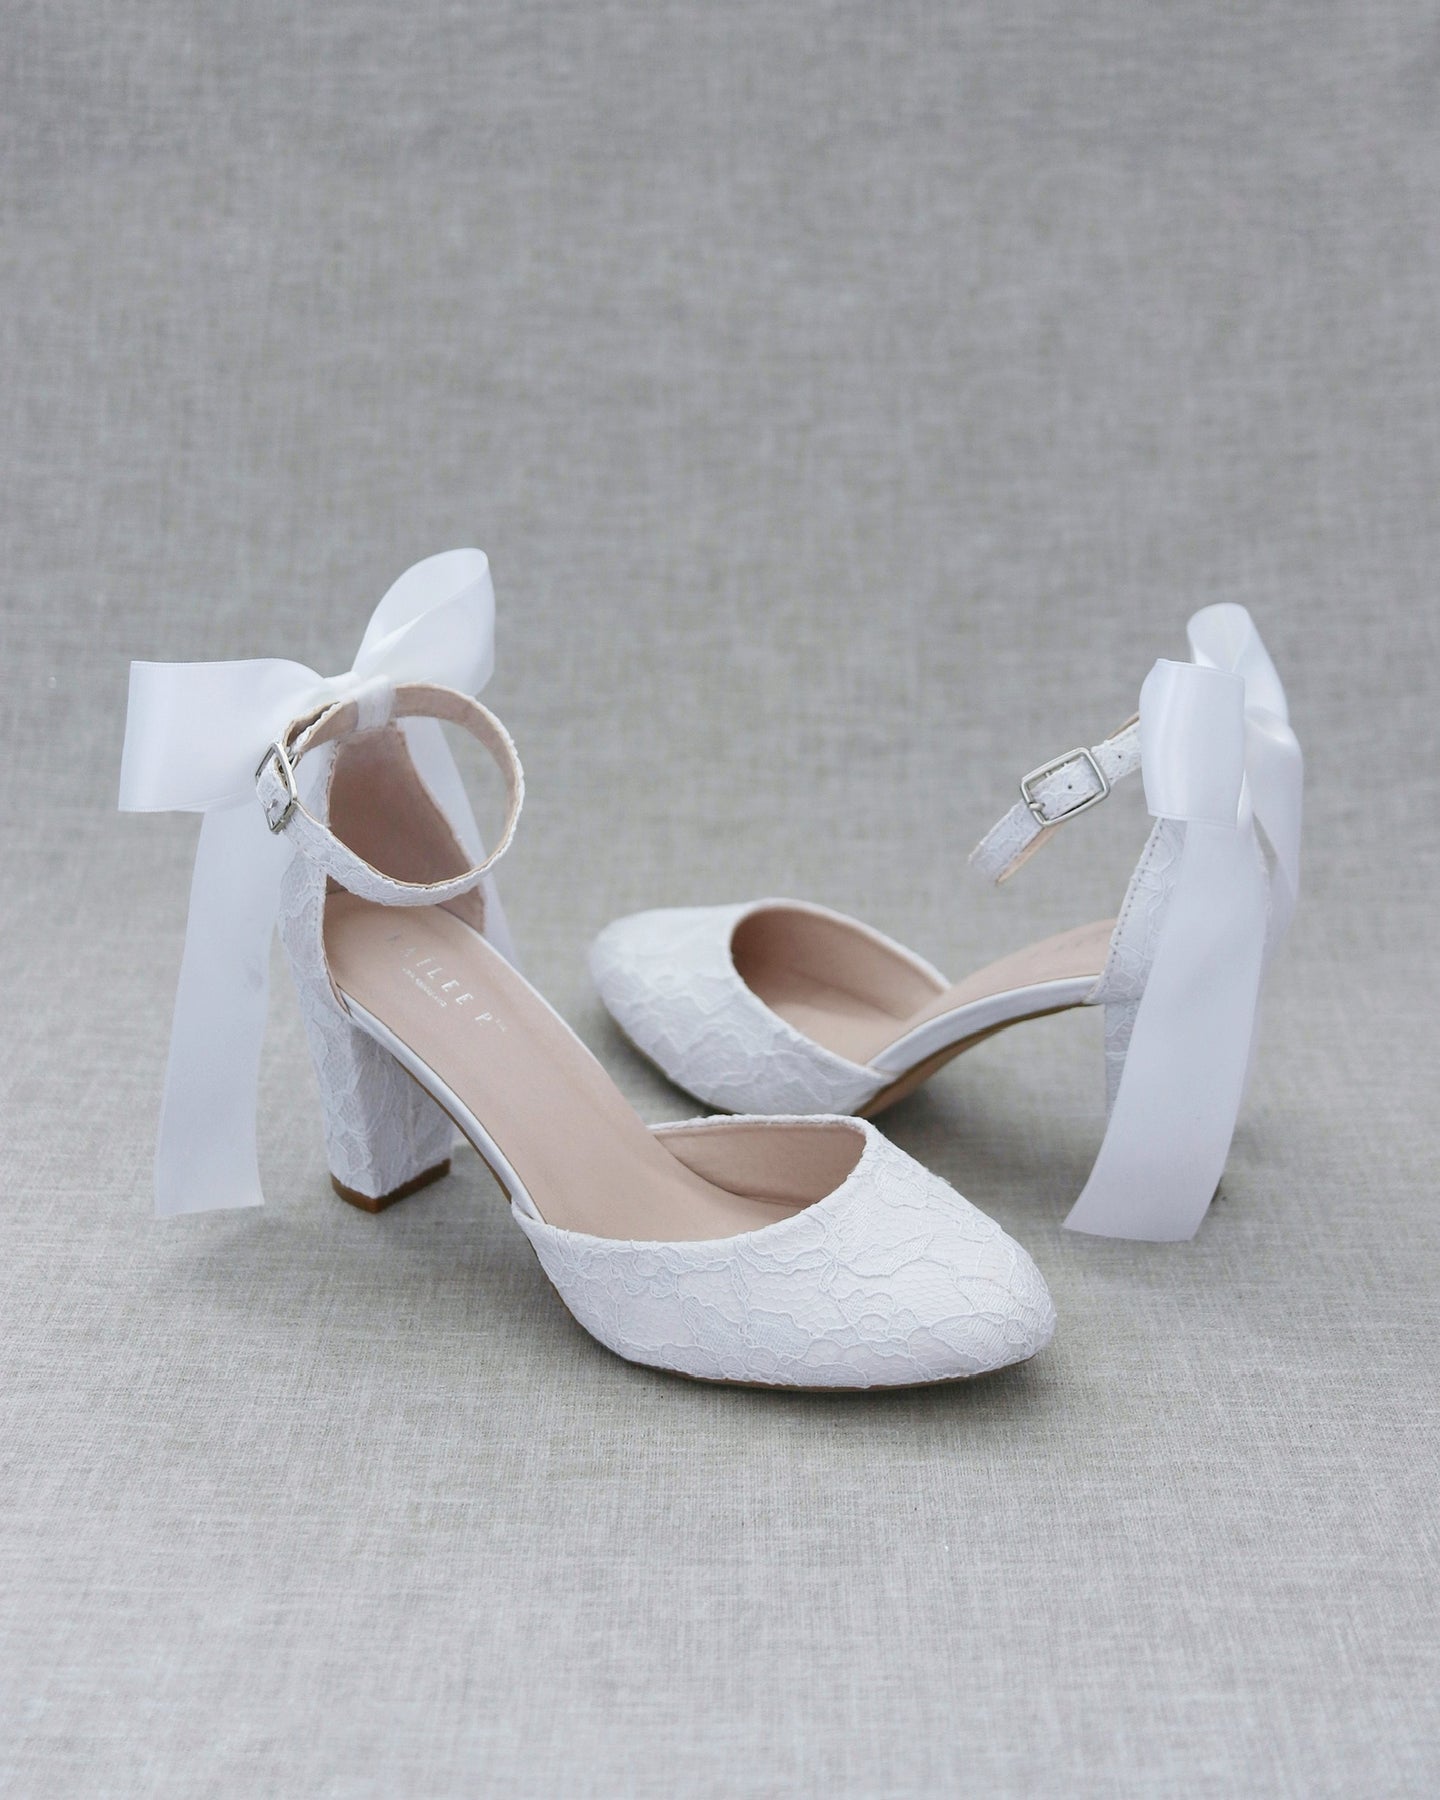 White Lace Block Heel with Satin Back Bow- Lace Shoes, White Heels, Wedding  Shoes